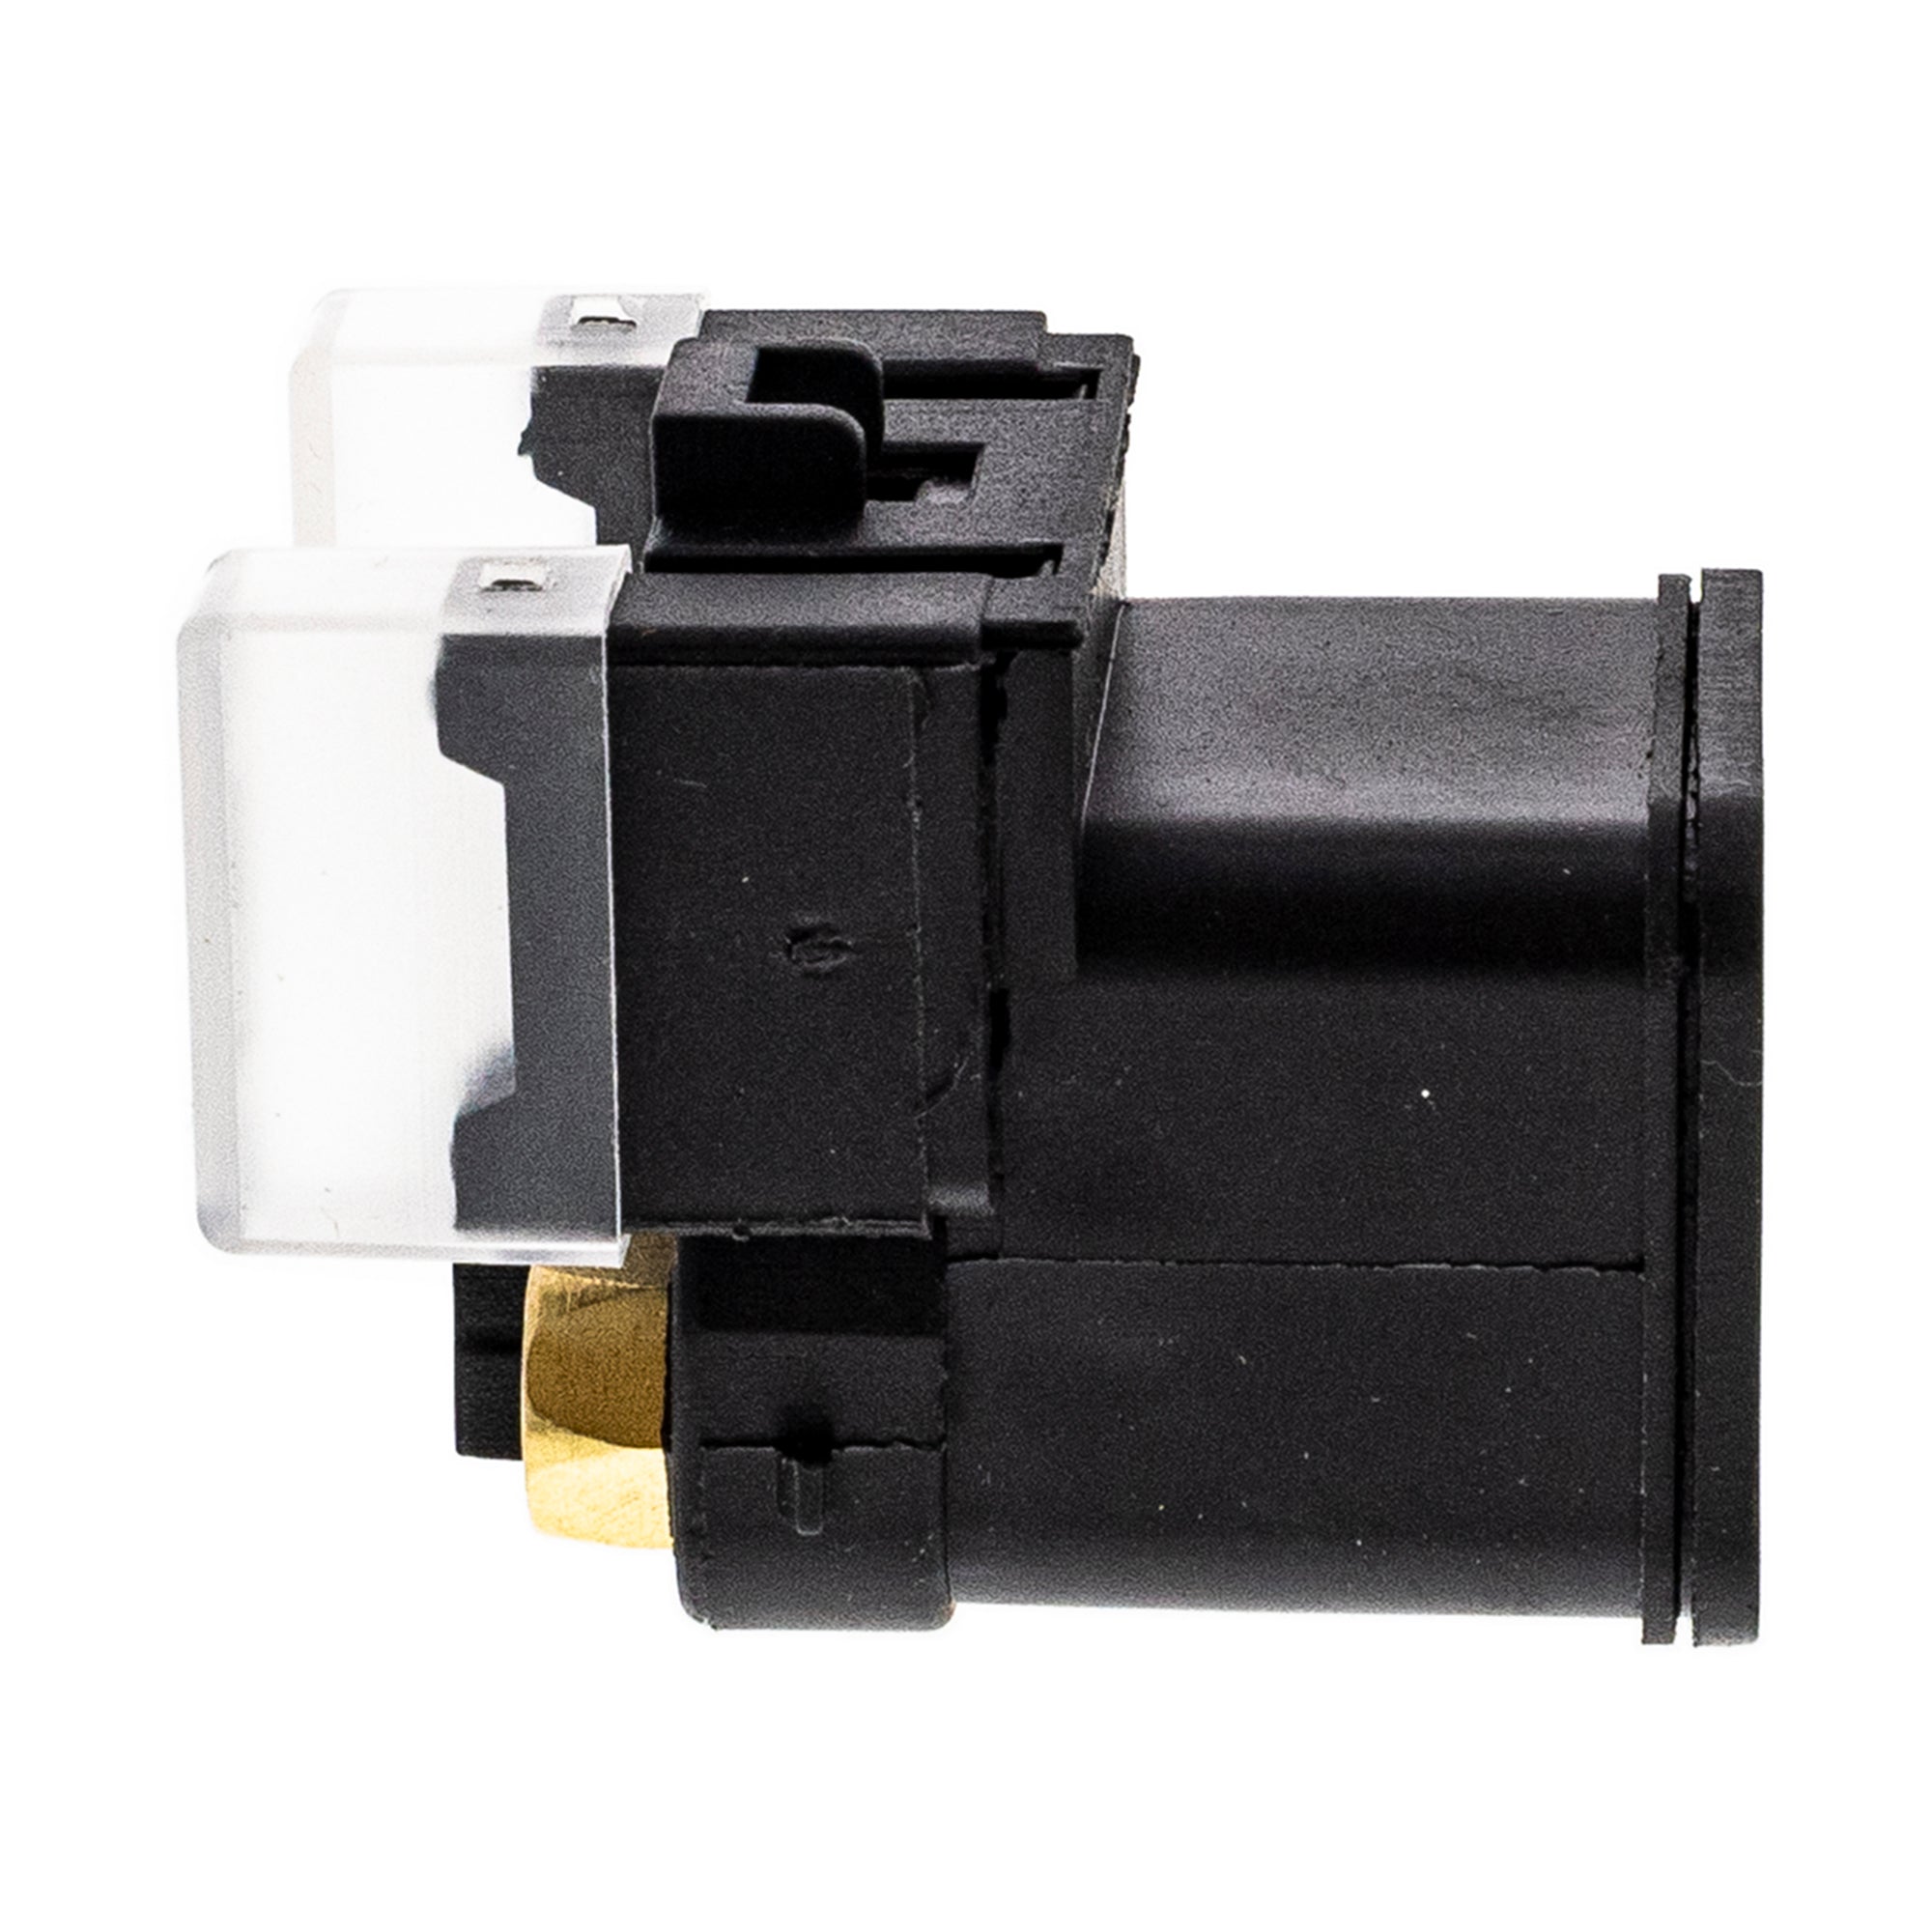 Starter Solenoid Relay Switch for Yamaha 5TJ-81940-12 WR250F WR450F